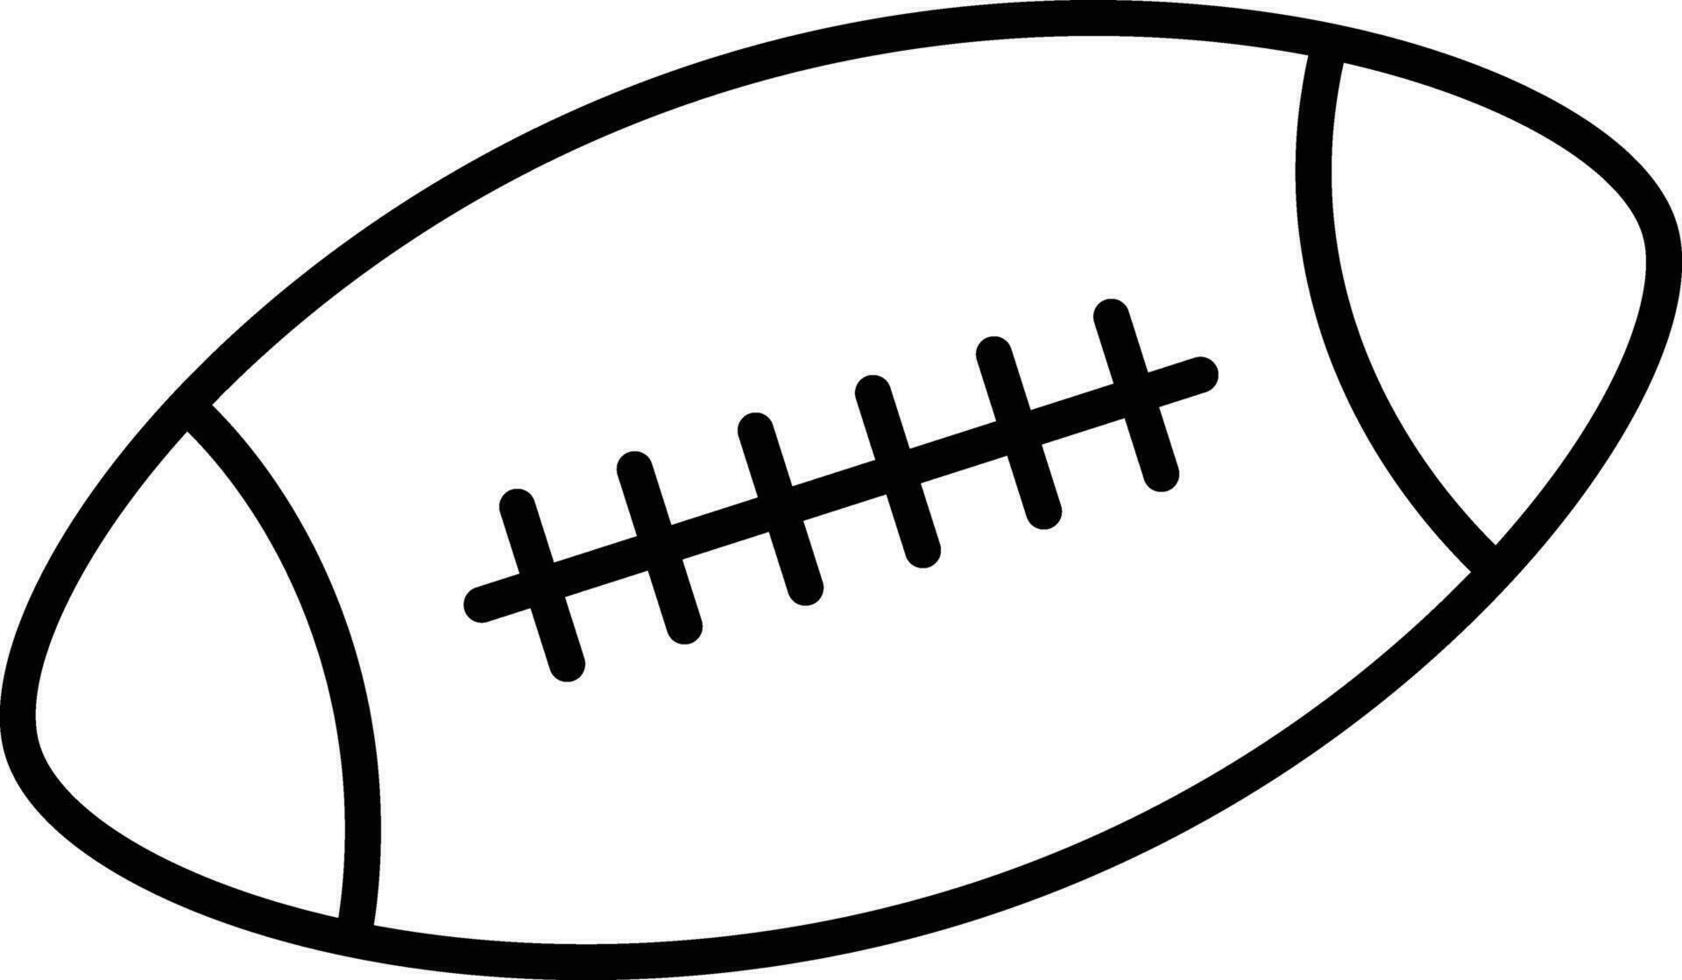 American football Outline vector illustration icon